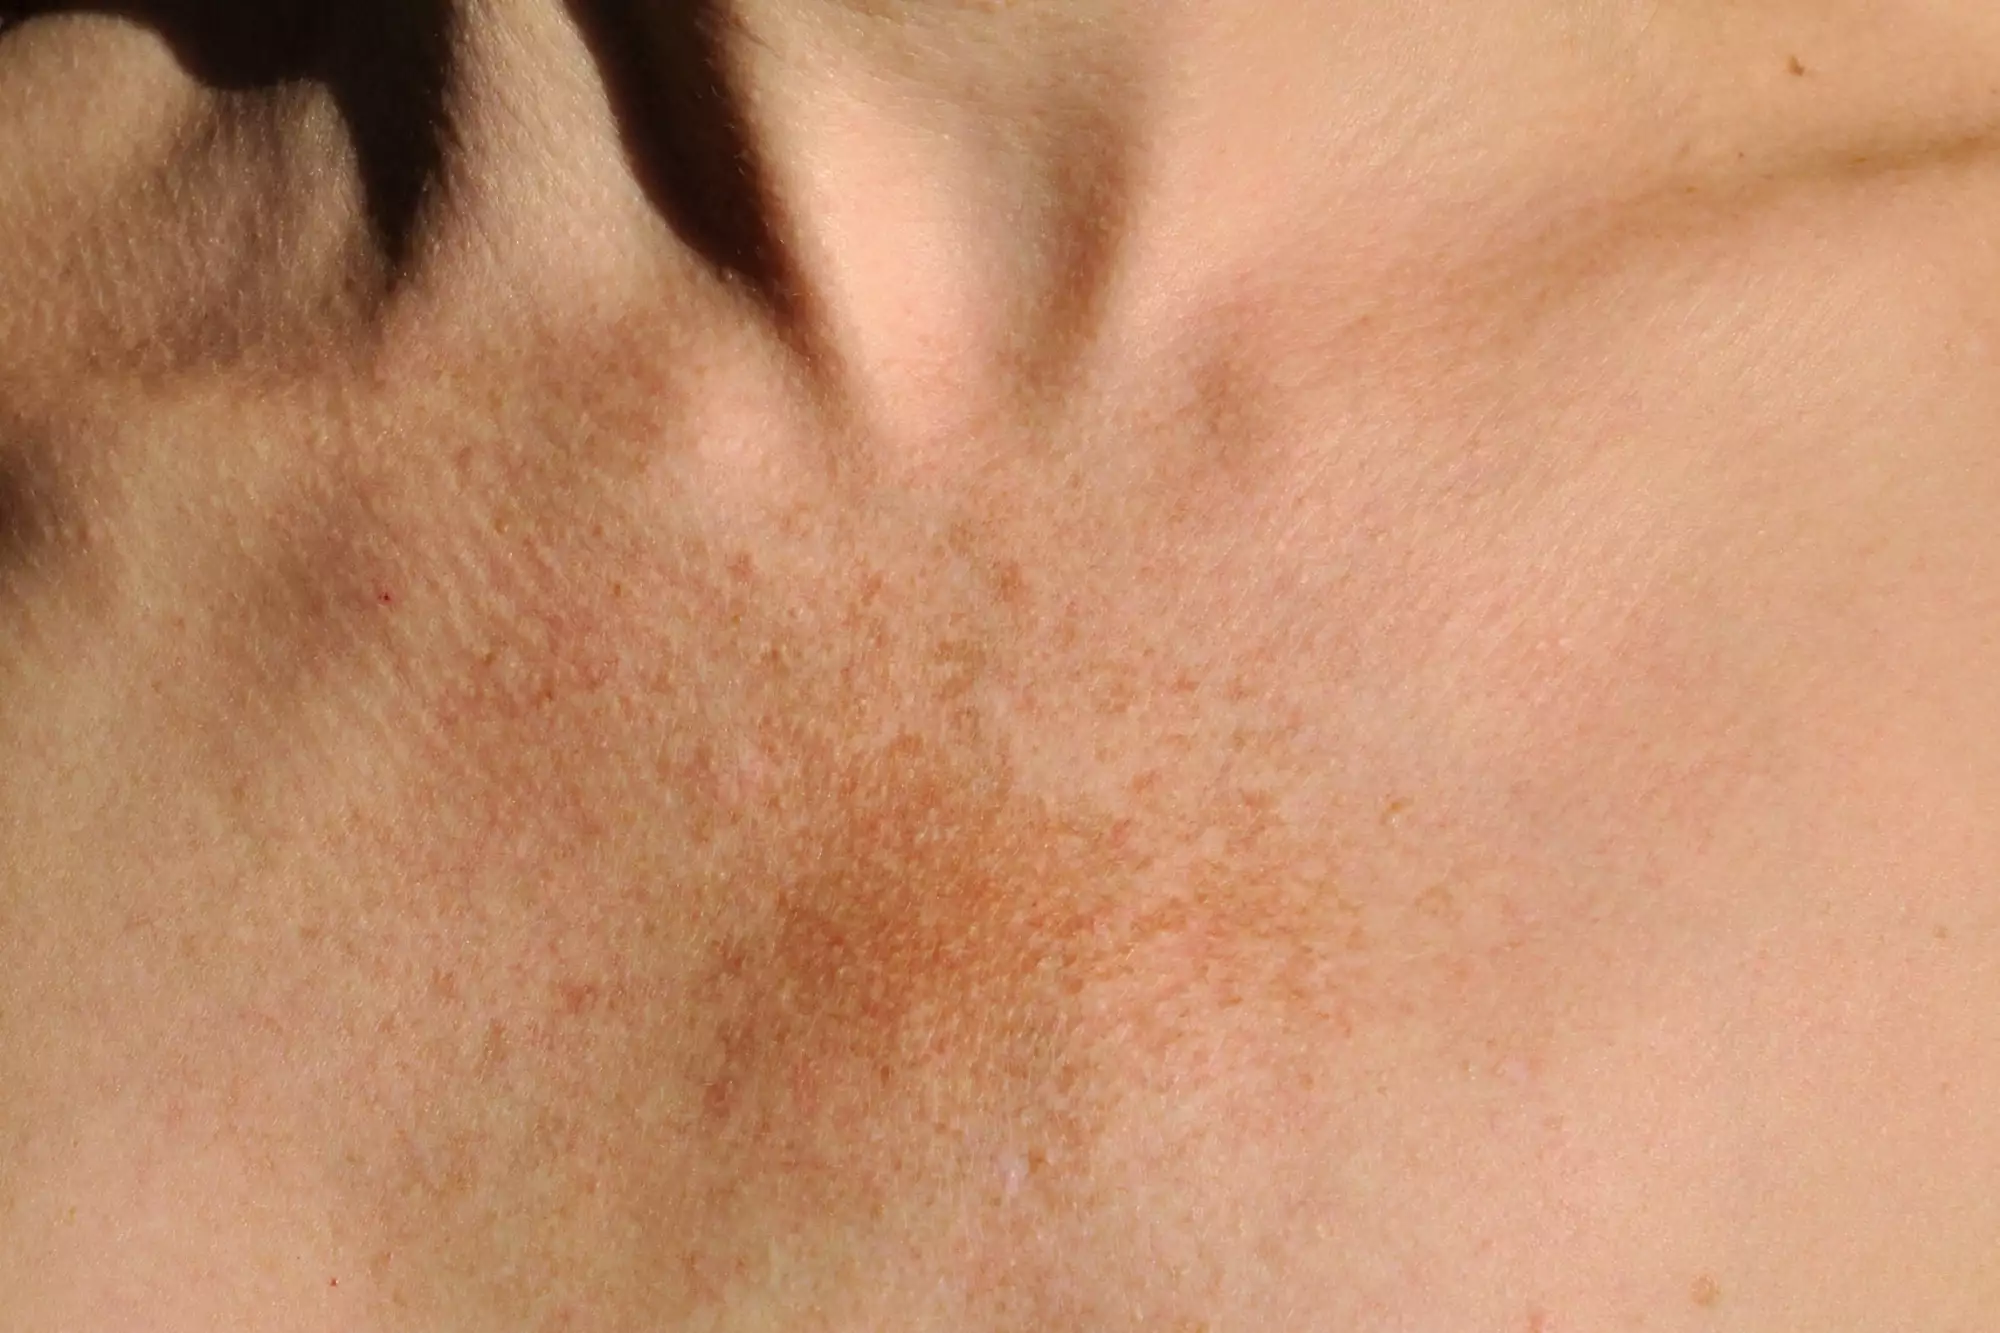 chest with melasma sunspots